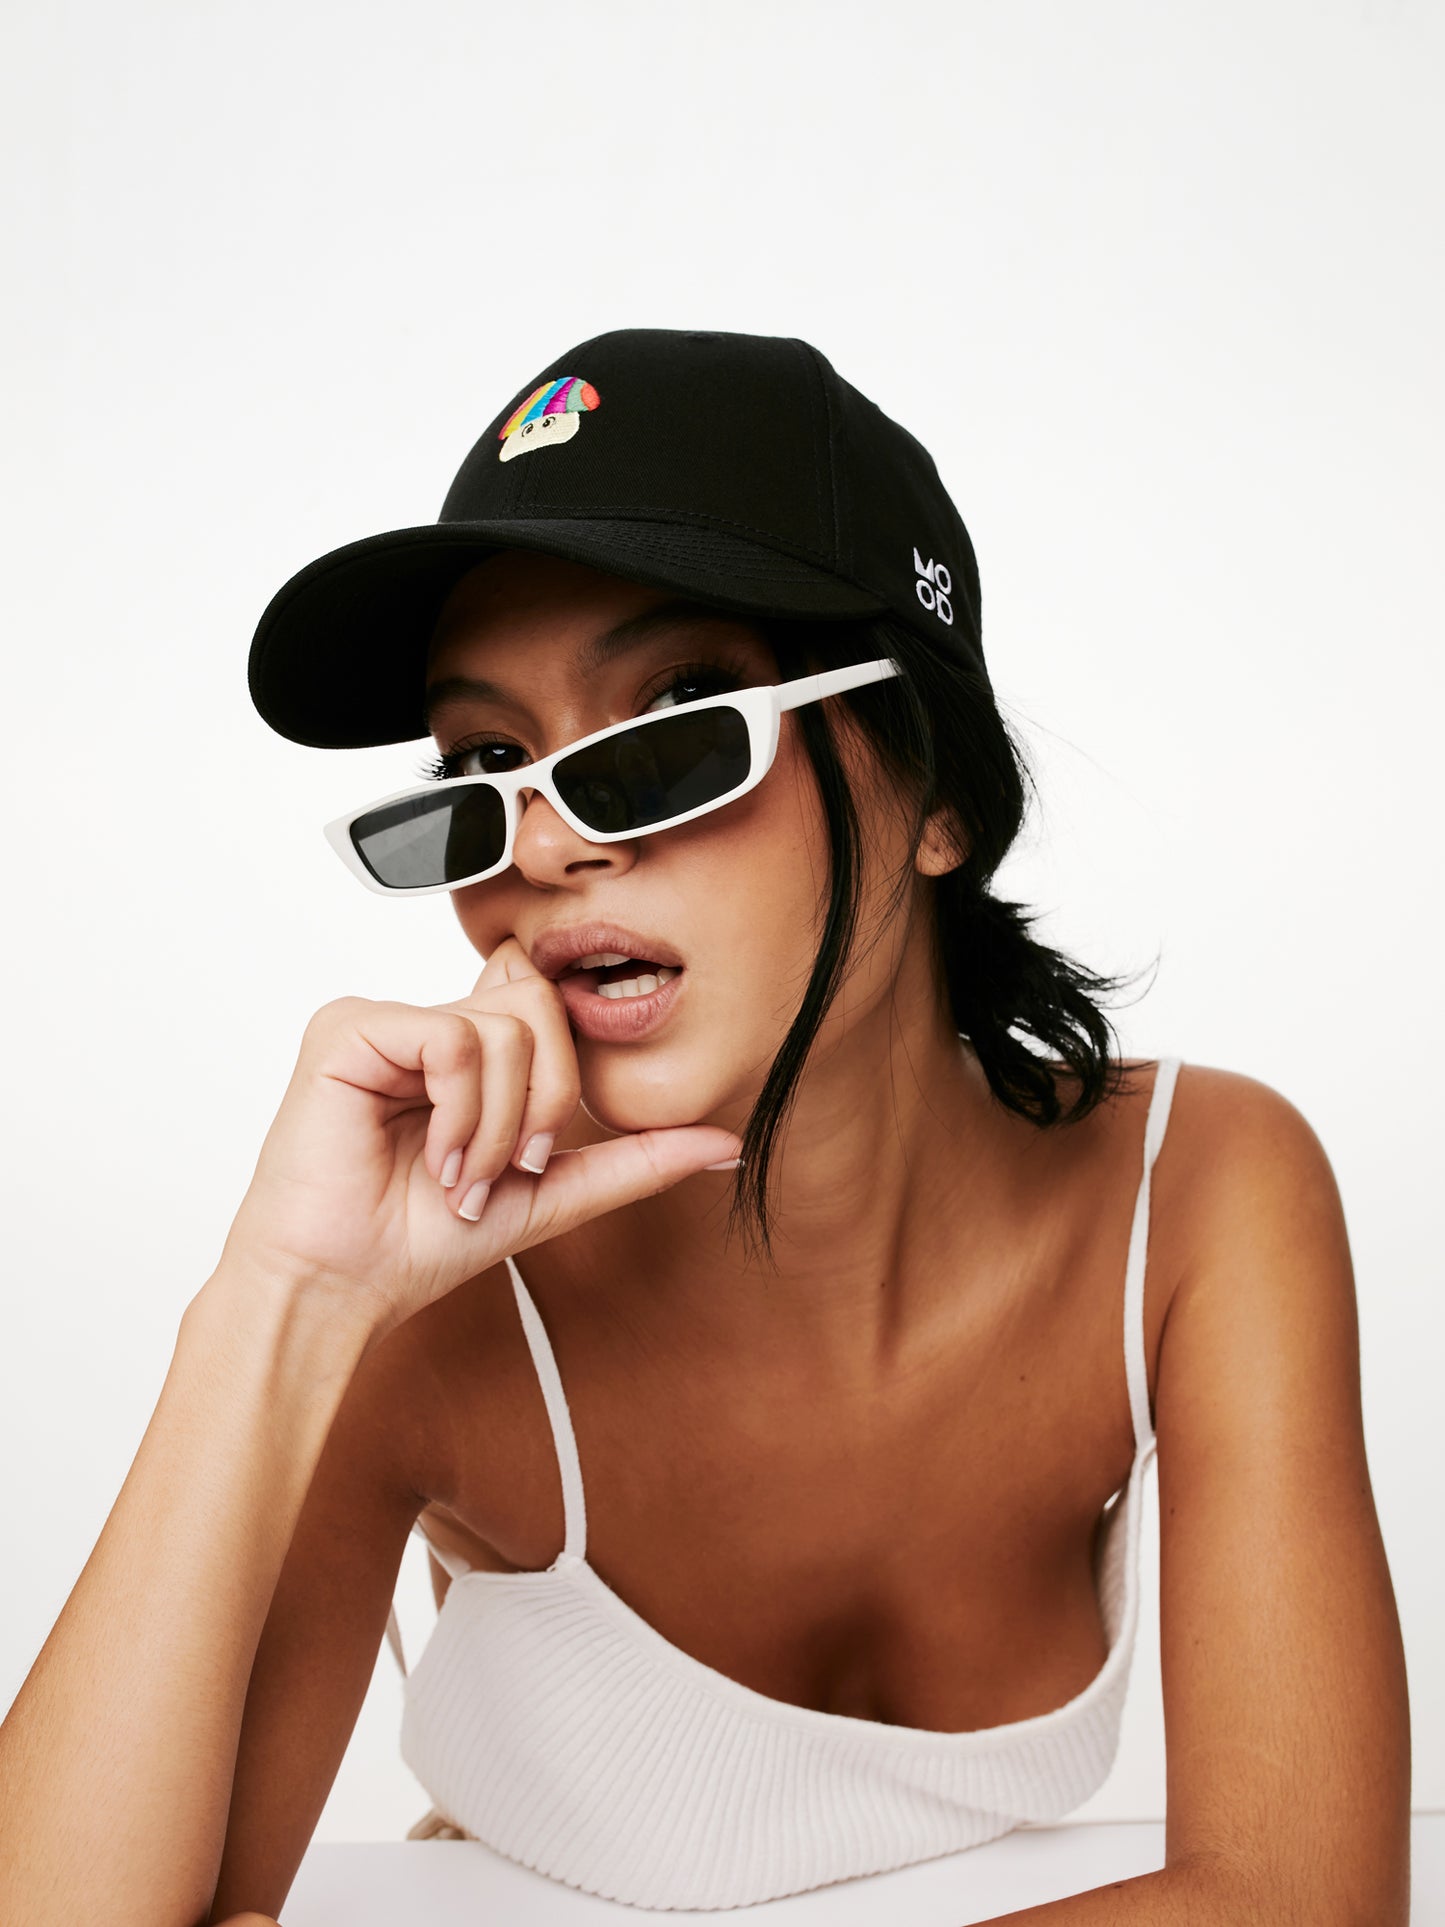 Load image into Gallery viewer, MOOD female model wearing Shroom baseball cap in black color product shoot
